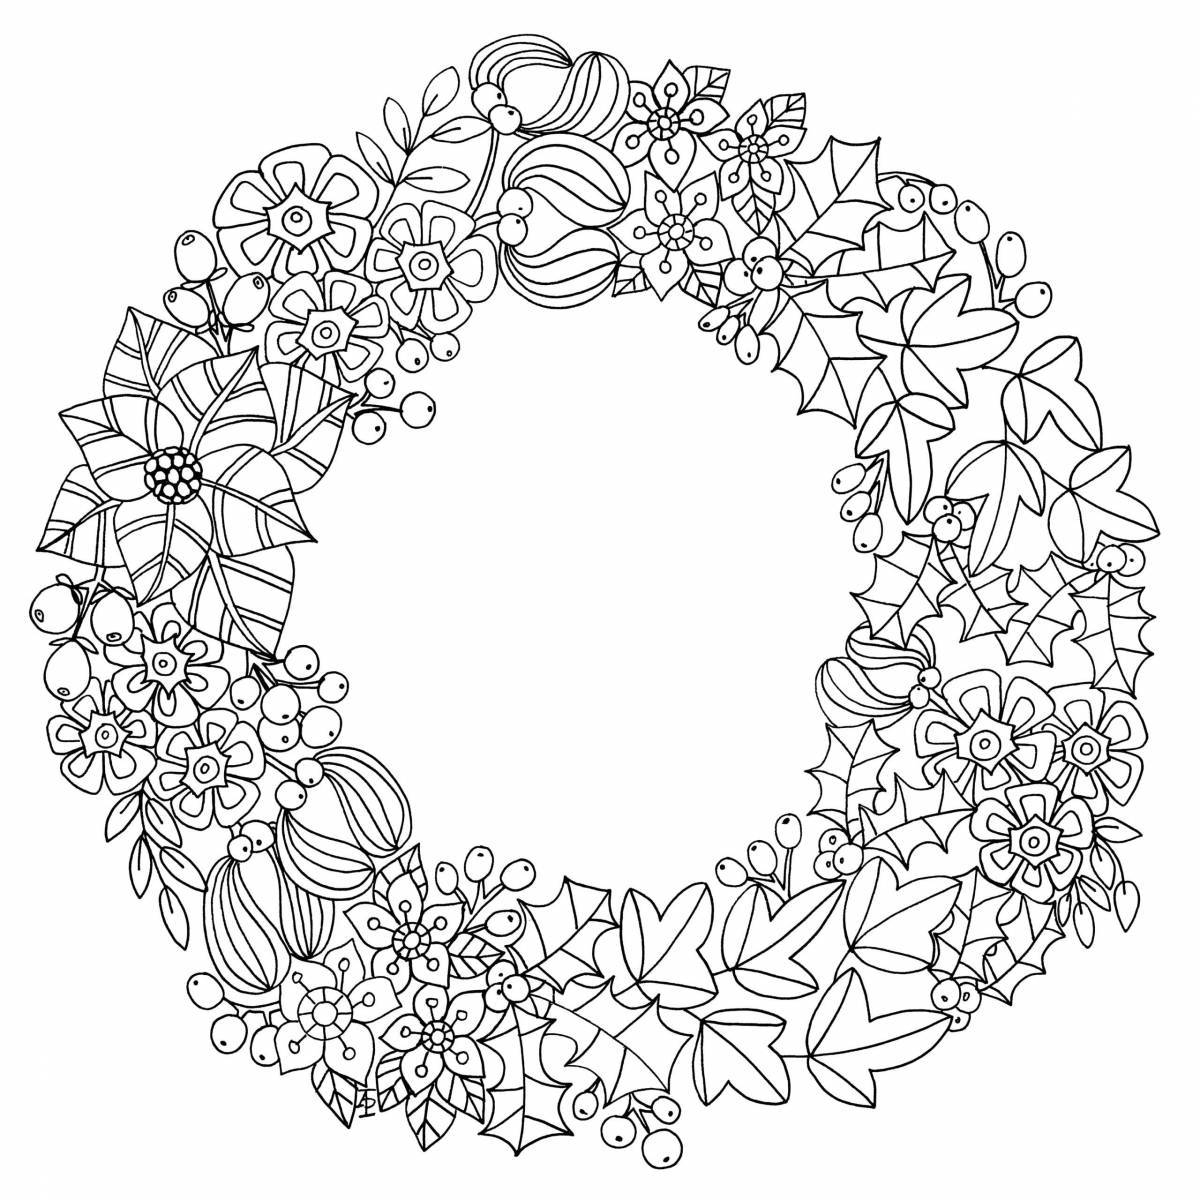 Intricate Christmas wreath coloring page